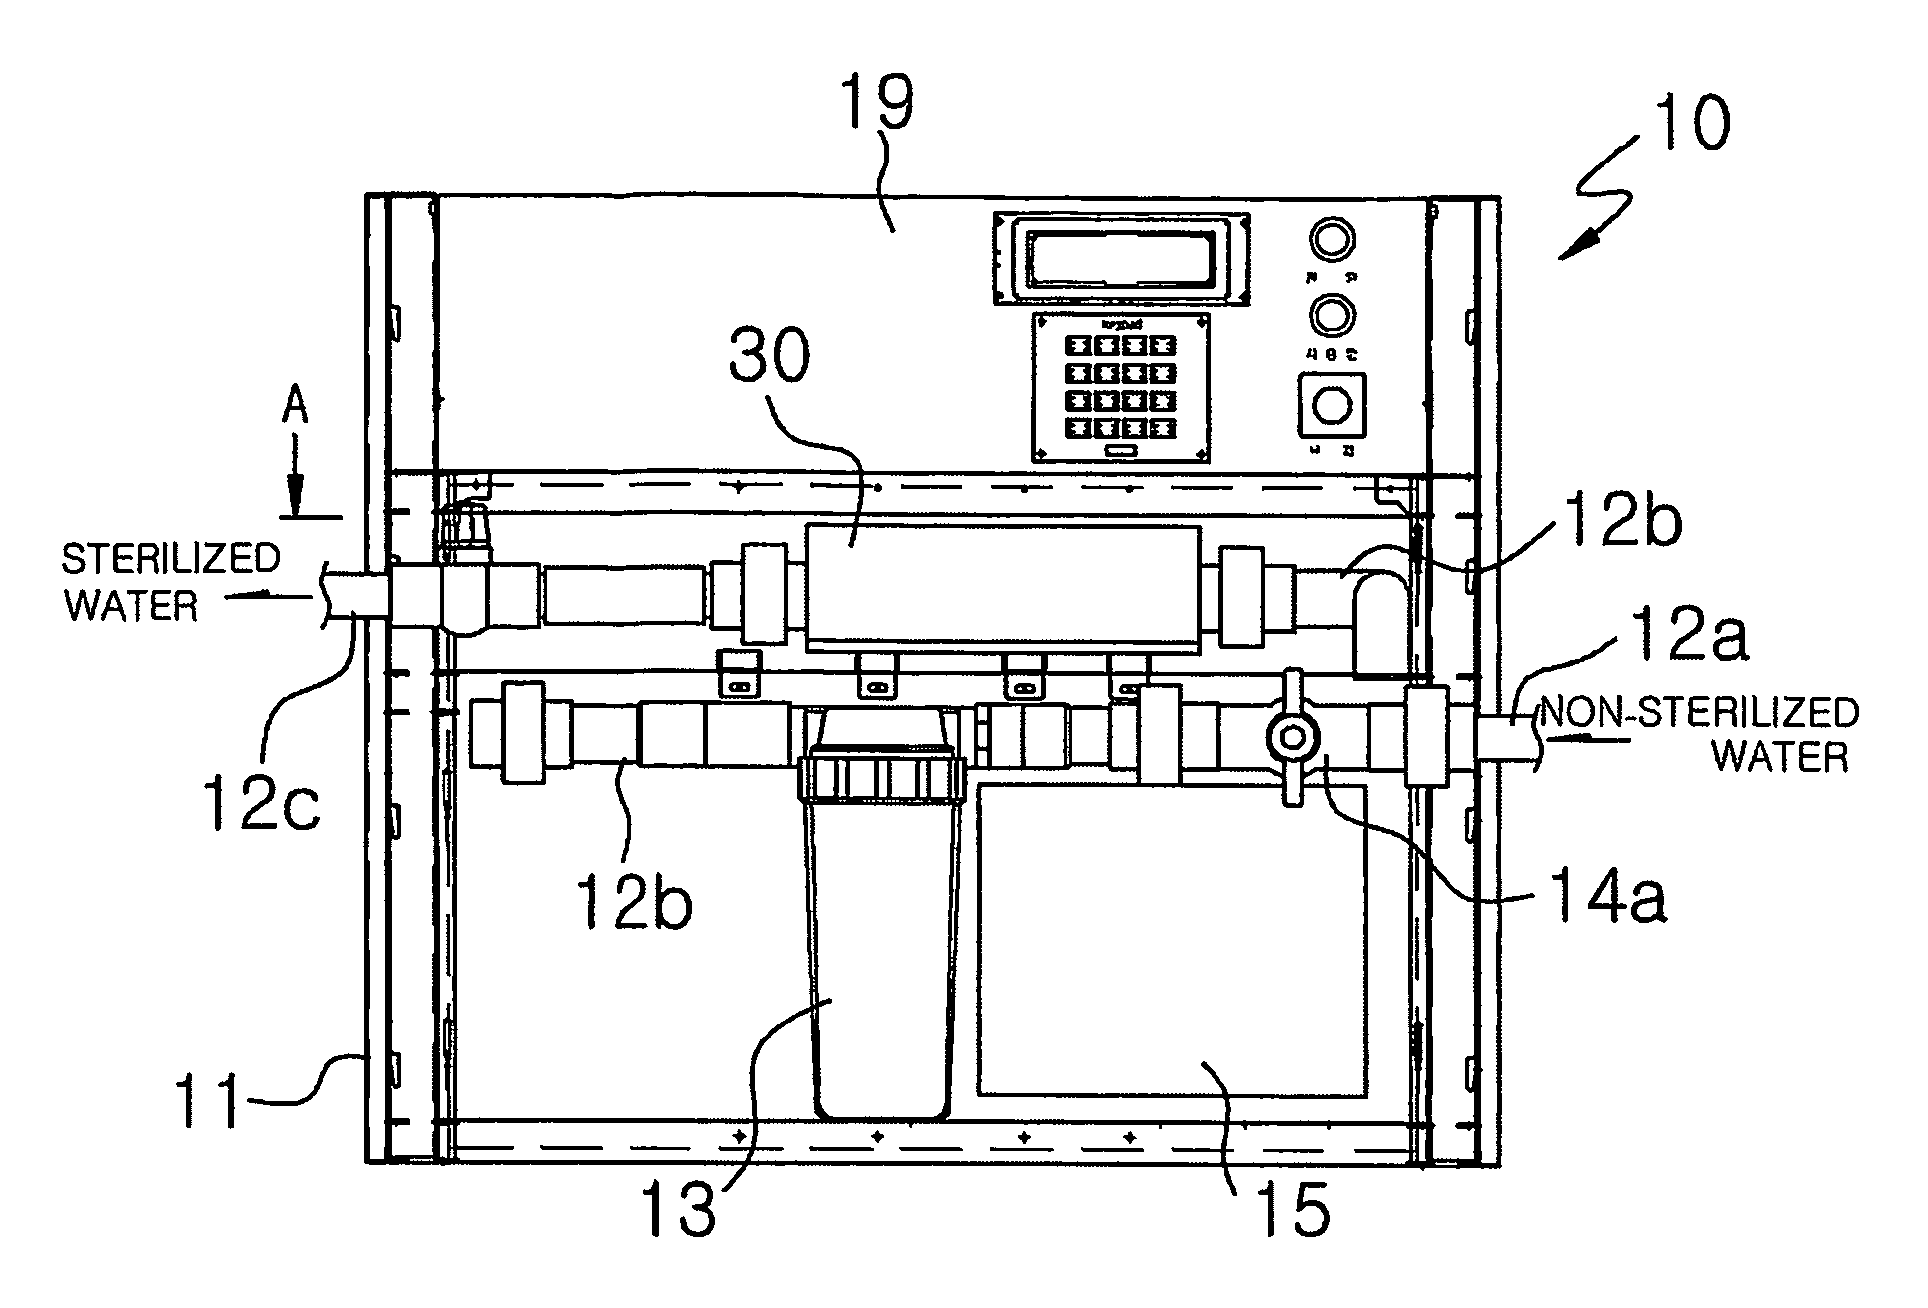 Cell for generating disinfection water and system using the same